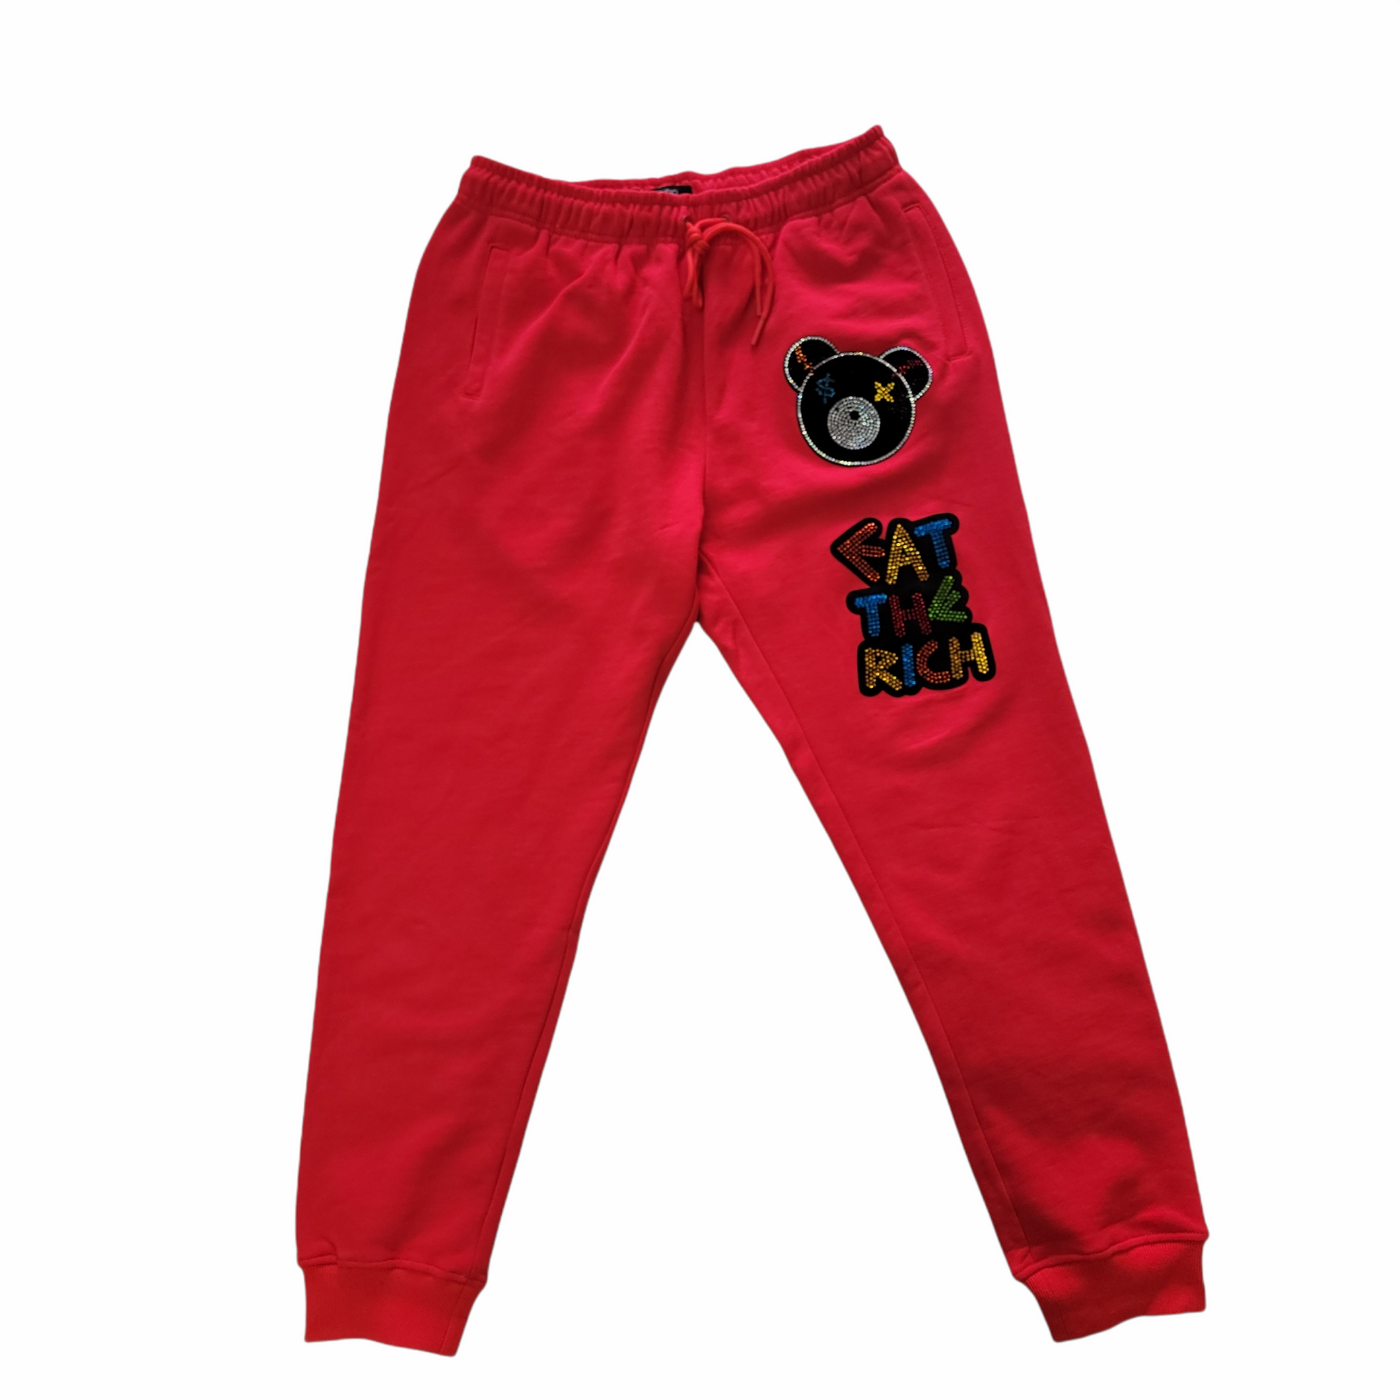 Eat The Rich Bear Sweatpants Red